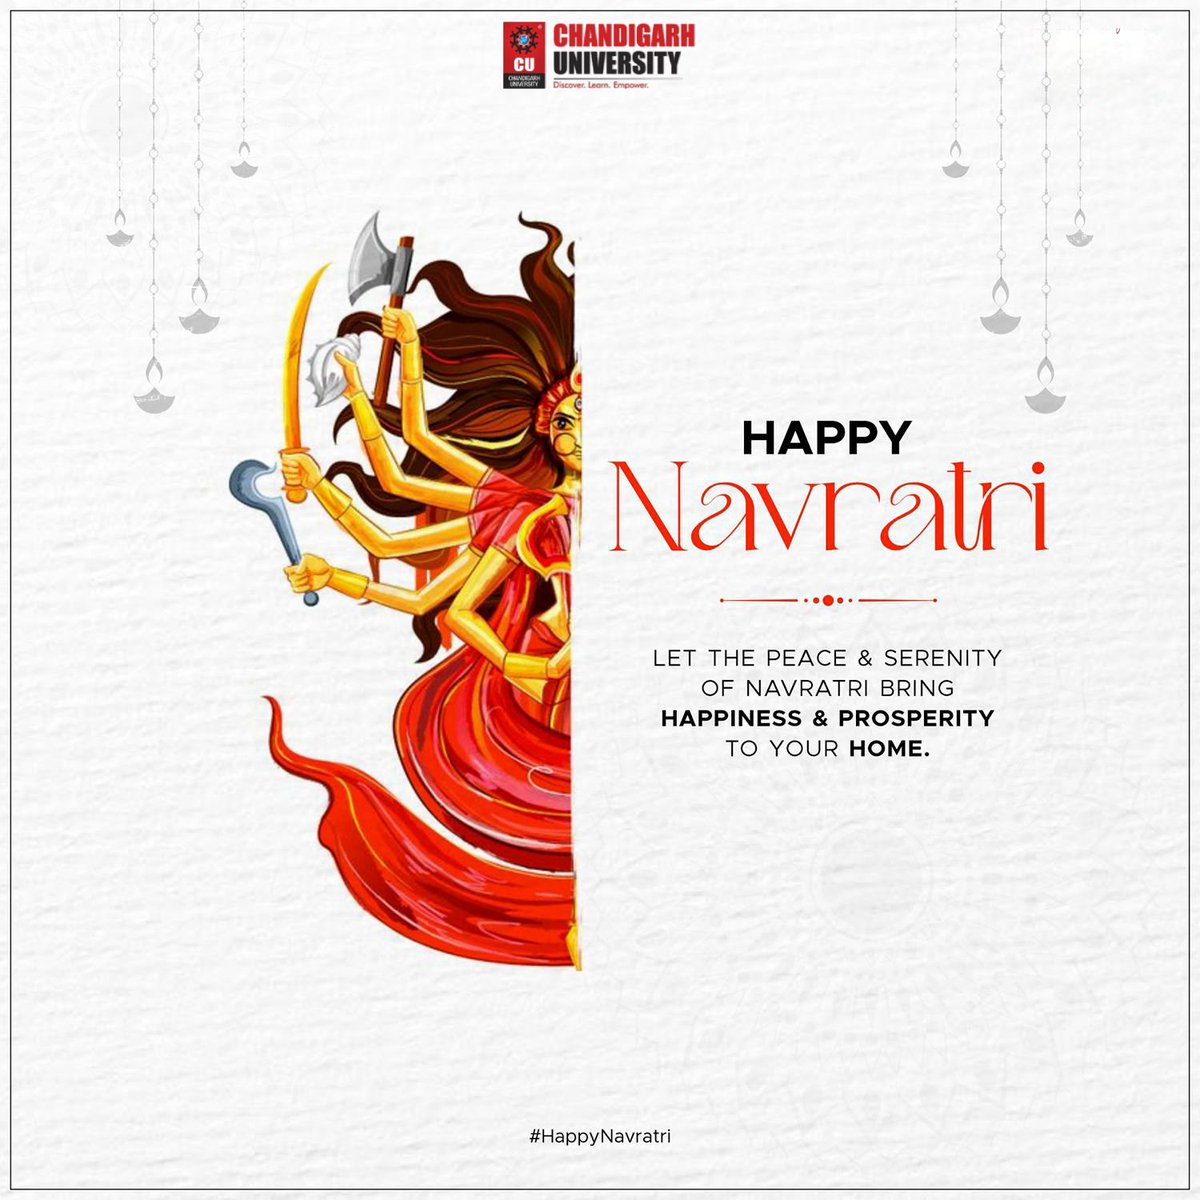 #ChandigarhUniversity extends heartfelt wishes for #Chaitra Navratri!

As we celebrate the divine feminine energy during these auspicious nine days, let's also embrace the strength, wisdom, and grace within each of us. May Maa Durga's blessings fill your life with courage to…